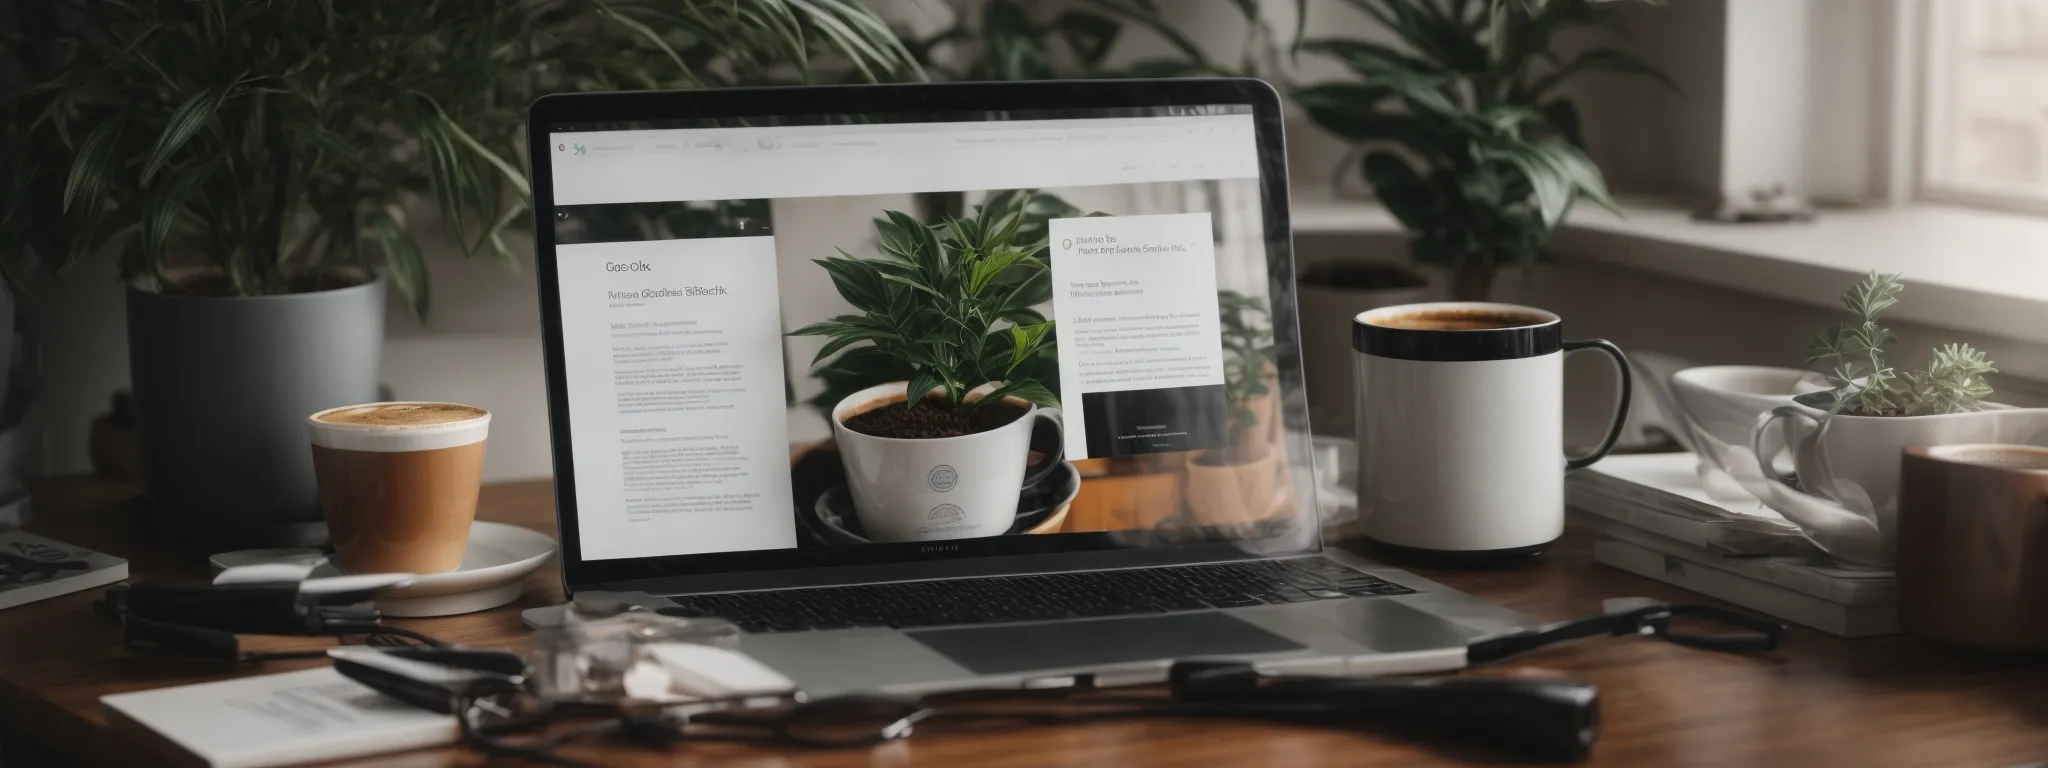 a desktop with an seo guidebook open next to a plant and a cup of coffee, symbolizing an seo professional’s workspace as they optimize a website's outbound links.